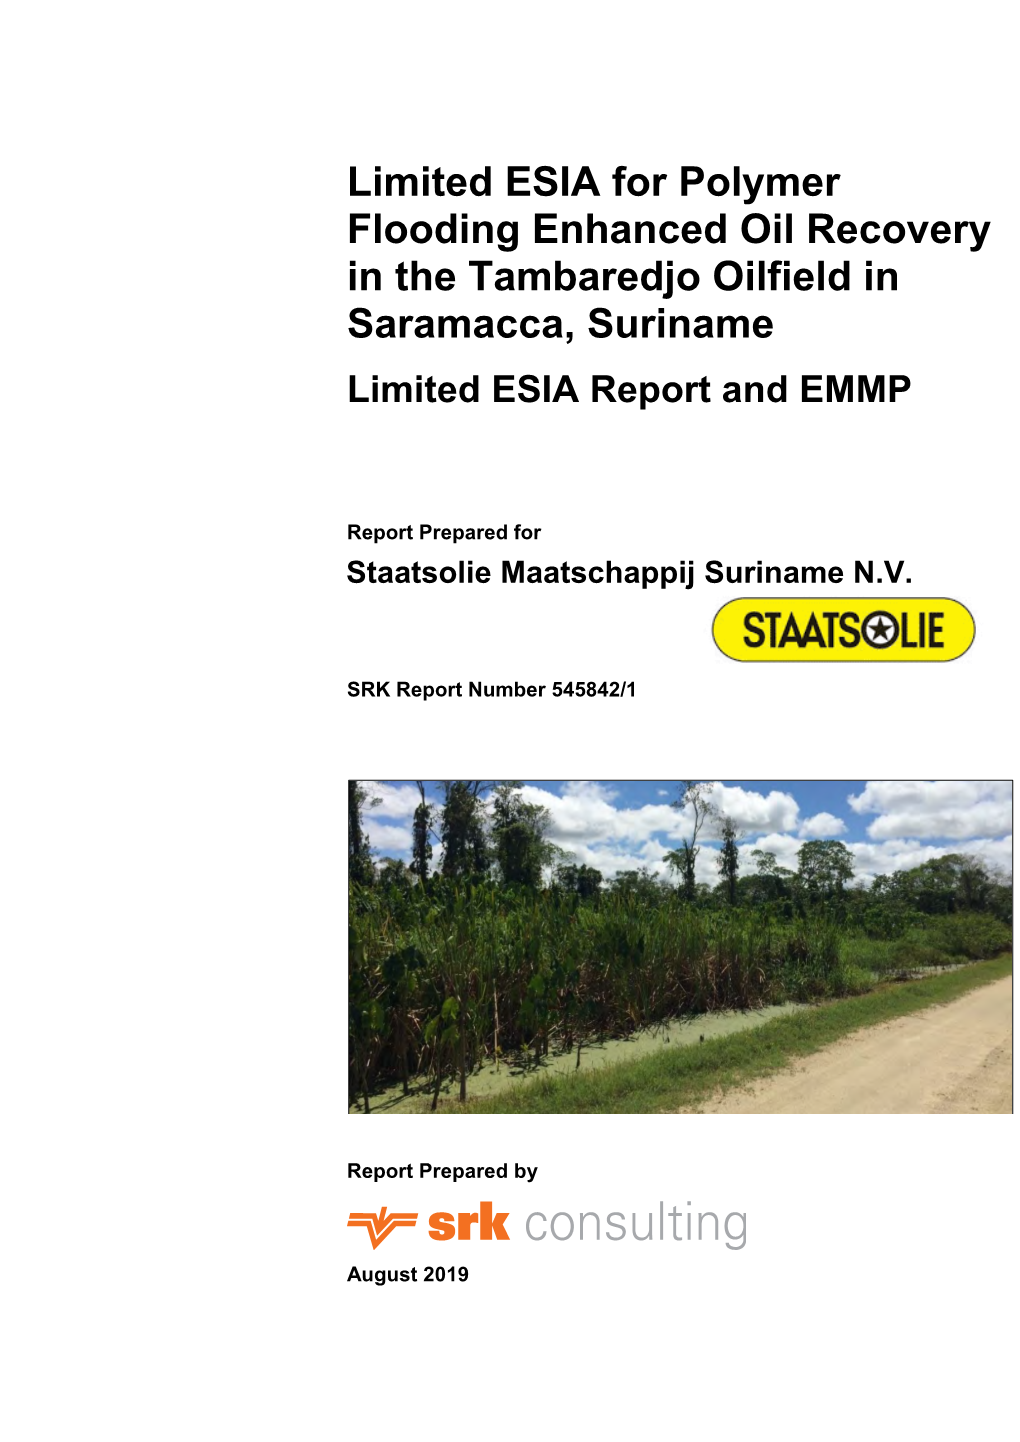 Limited ESIA for Polymer Flooding Enhanced Oil Recovery in the Tambaredjo Oilfield in Saramacca, Suriname Limited ESIA Report and EMMP